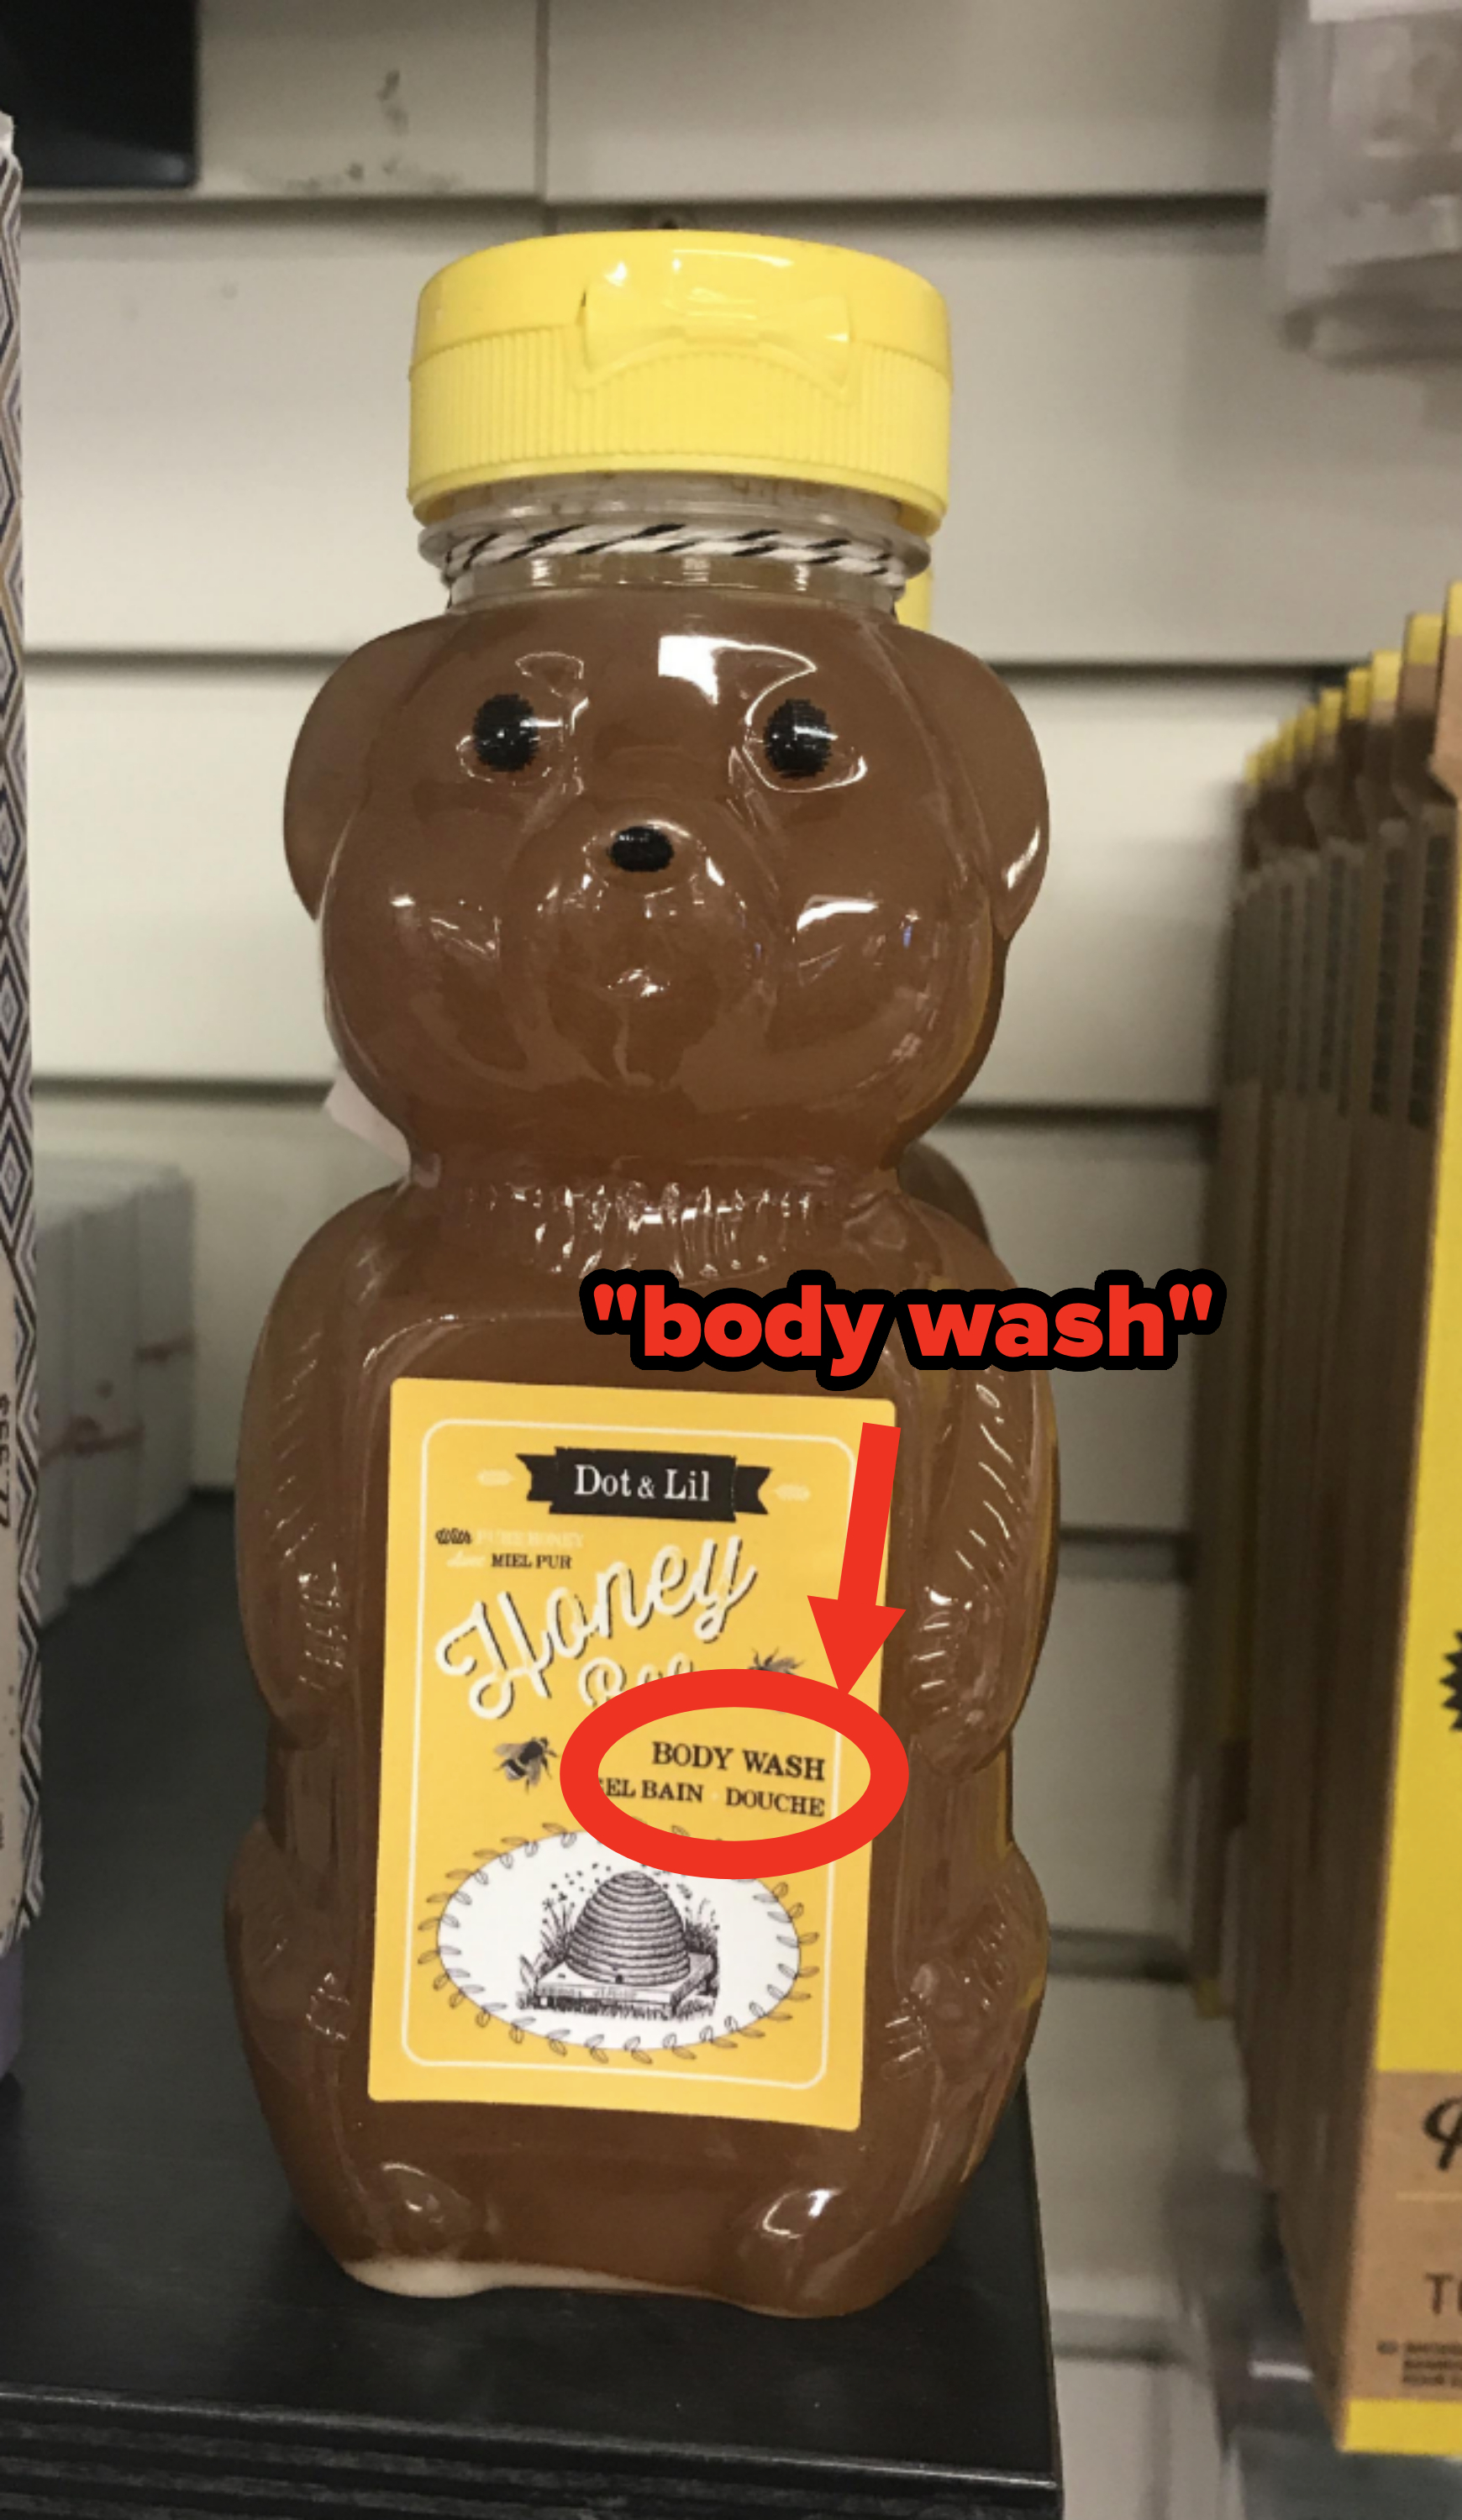 Bear-shaped honey bottle repurposed as body wash container on a shelf